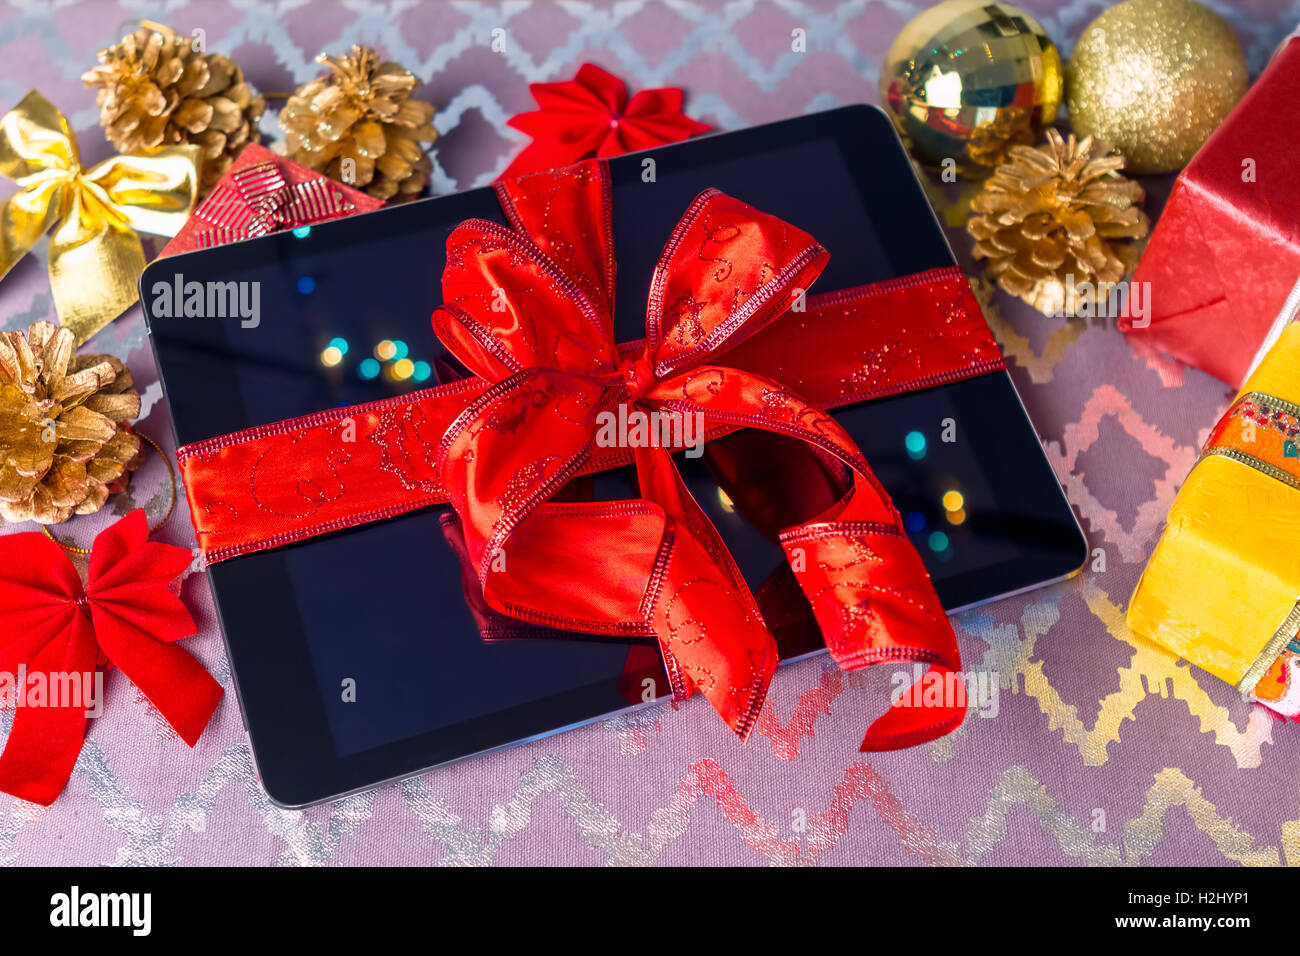 Tablet pc for Christmas with gifts, decorations on table. Stock Photo